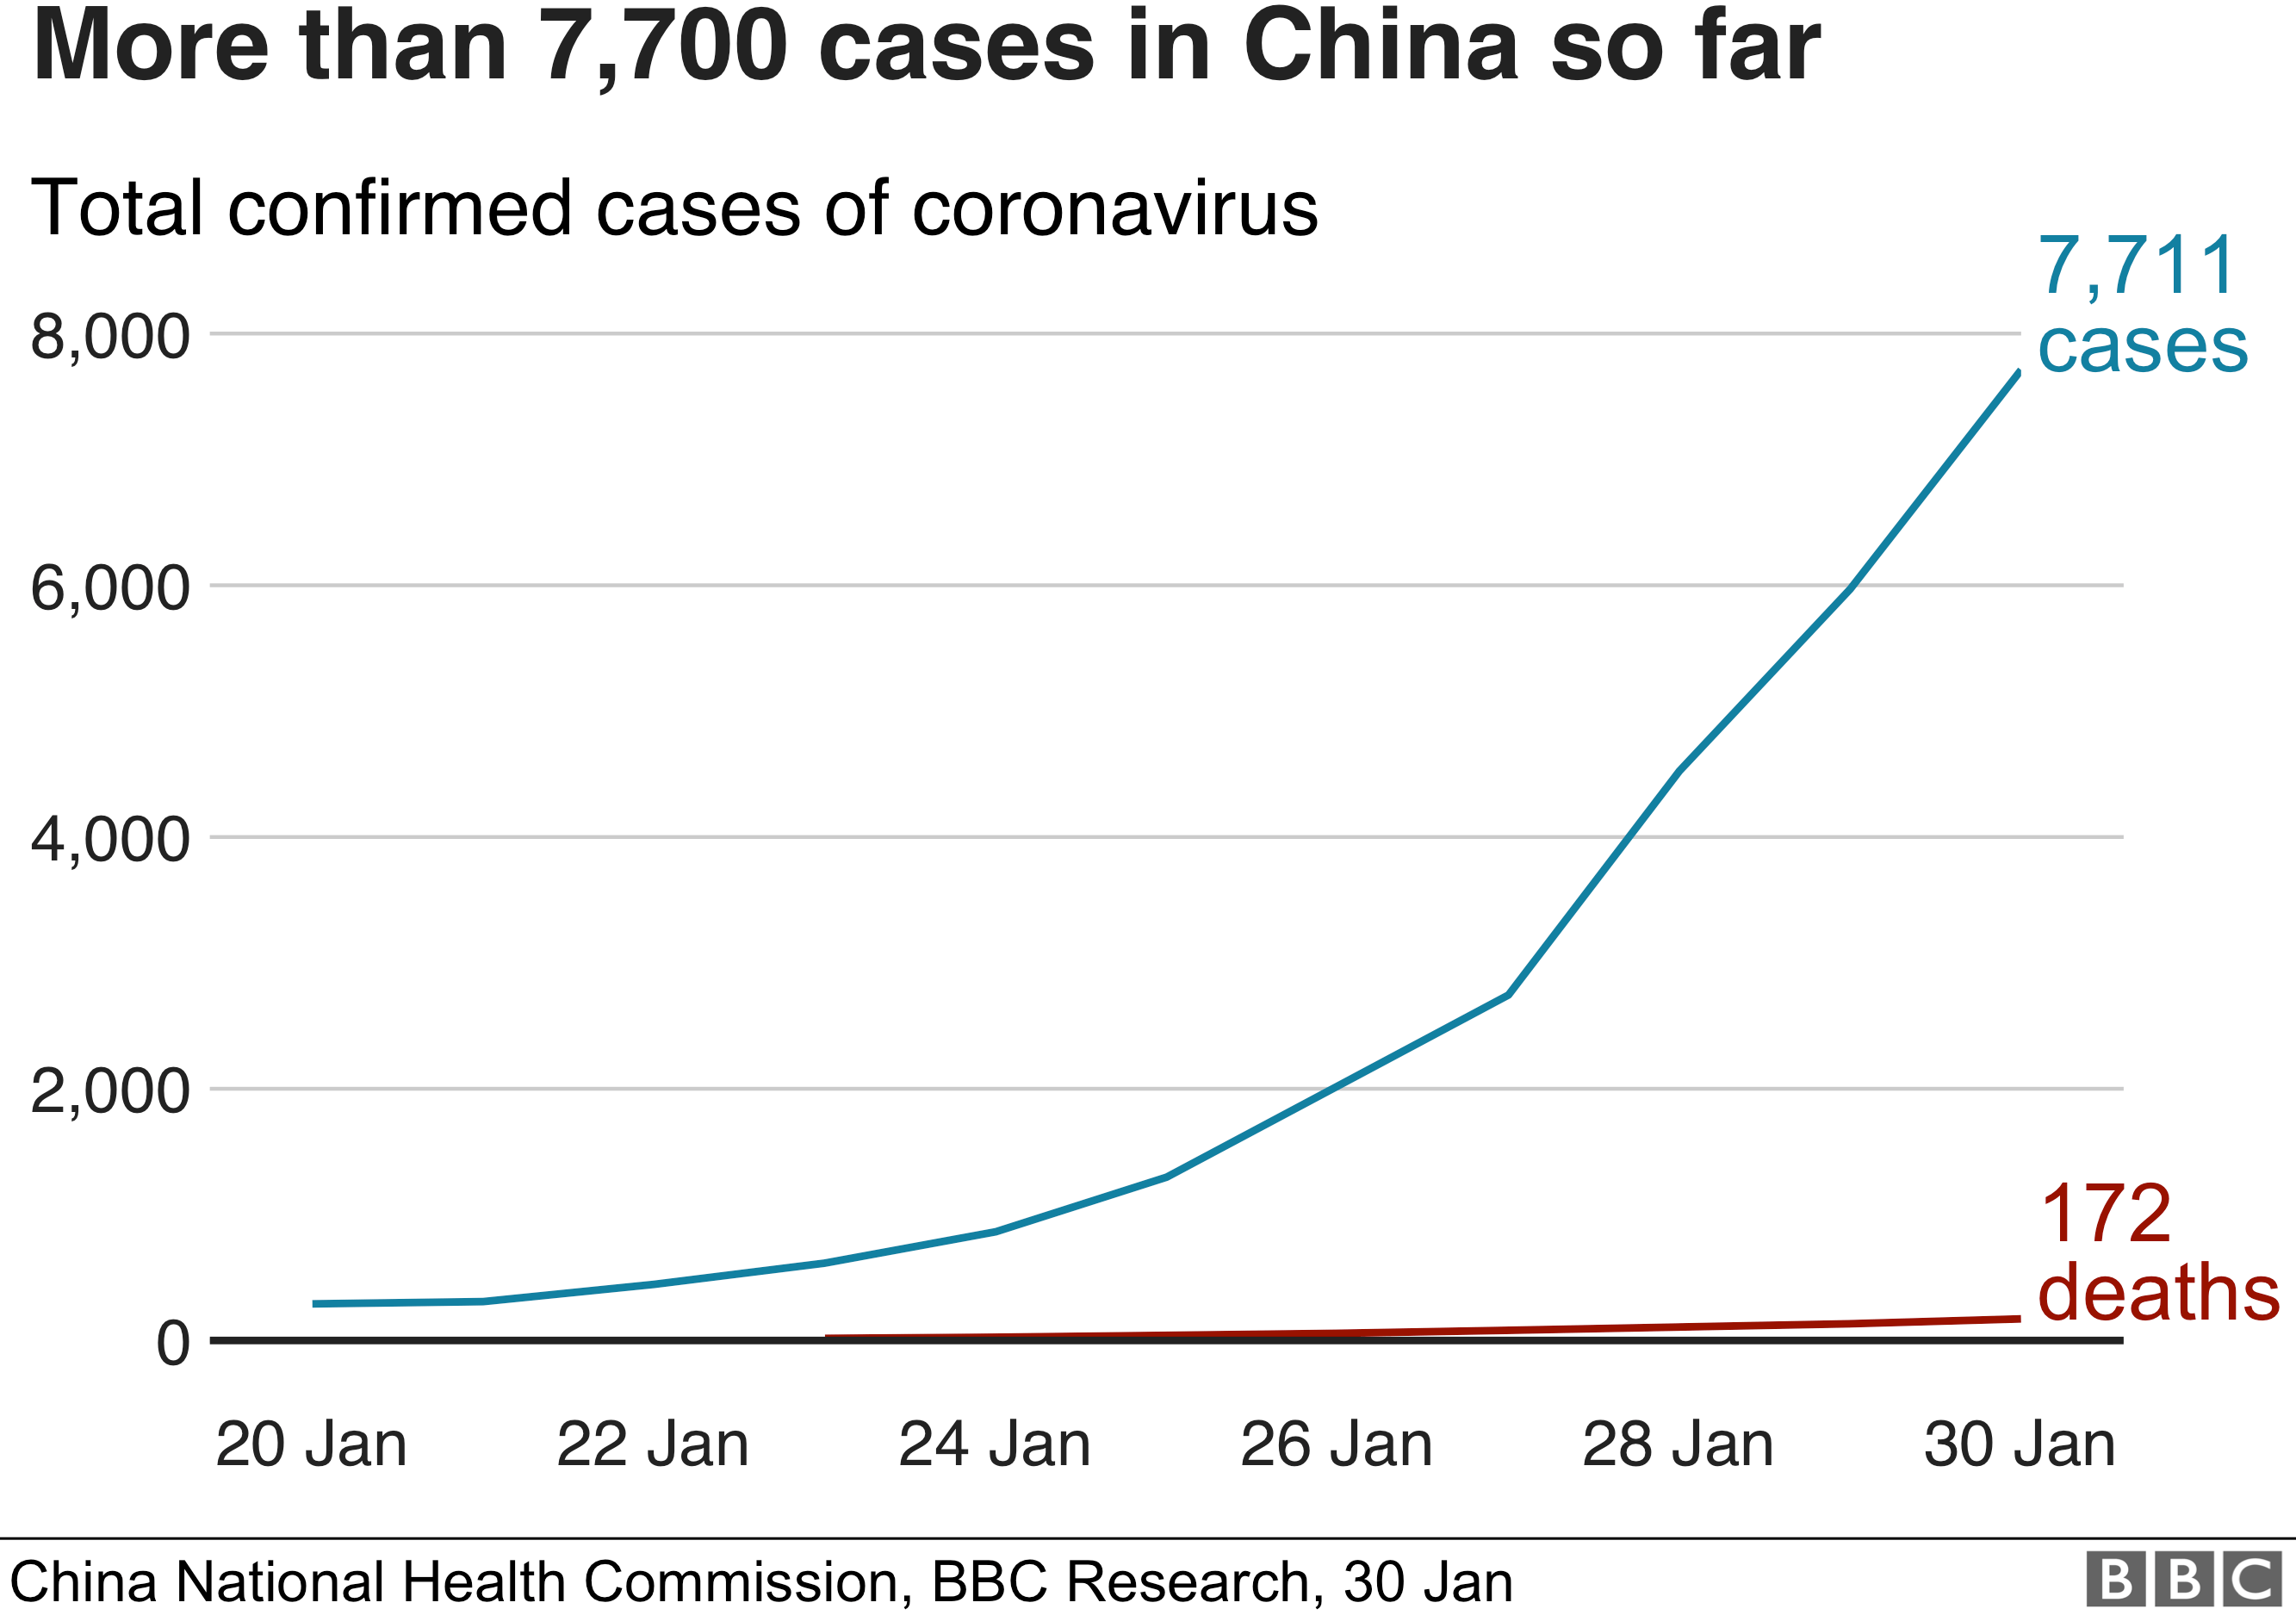 Corona virus deaths in China pass 170 and cases pass 7700.